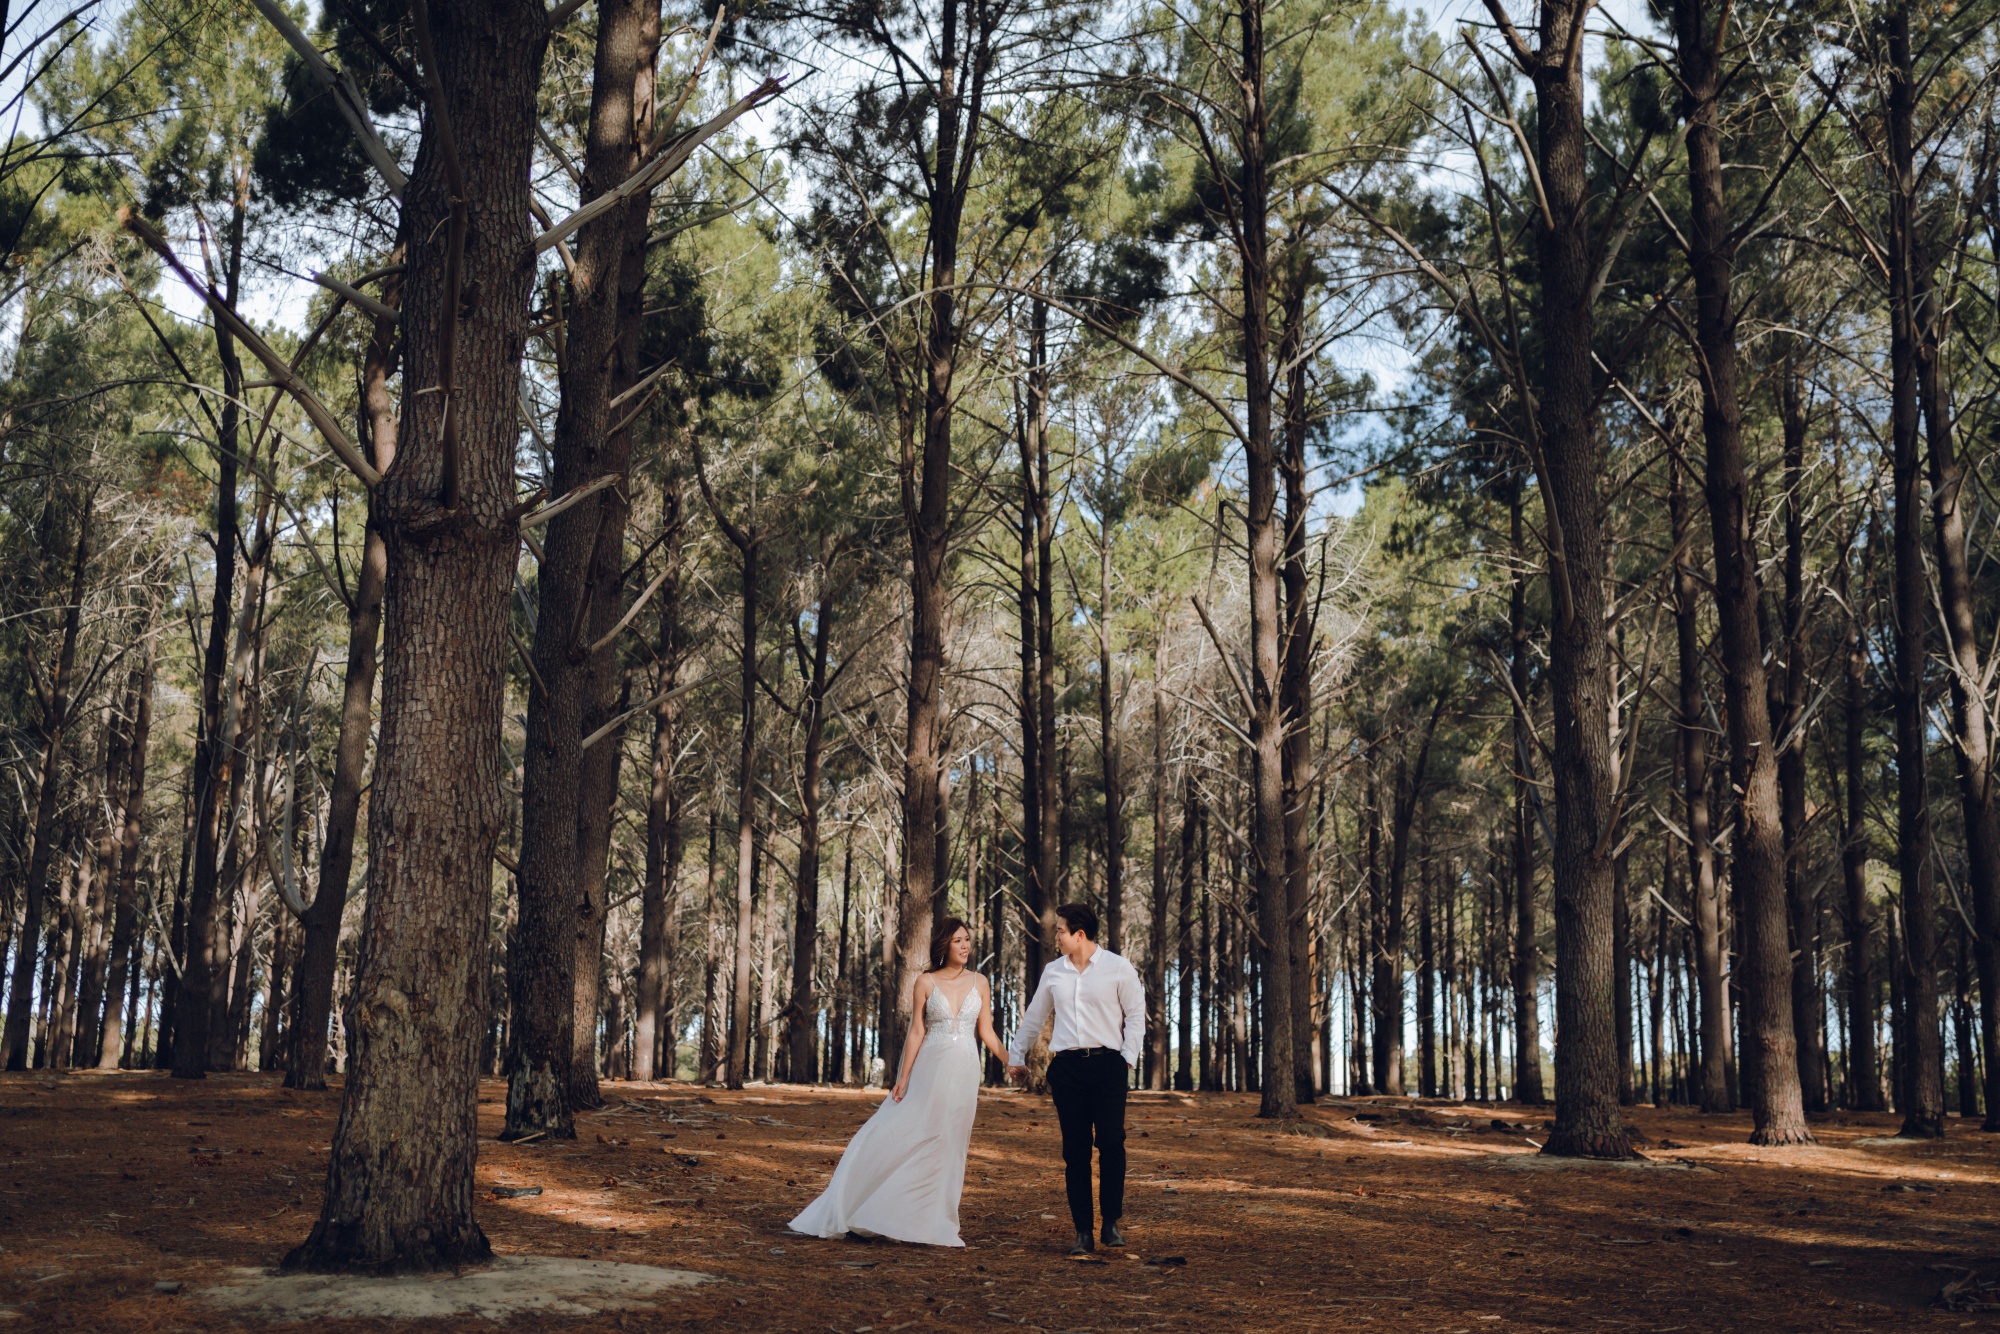 Capturing Forever in Perth: Jasmine & Kamui's Pre-Wedding Story by Jimmy on OneThreeOneFour 3